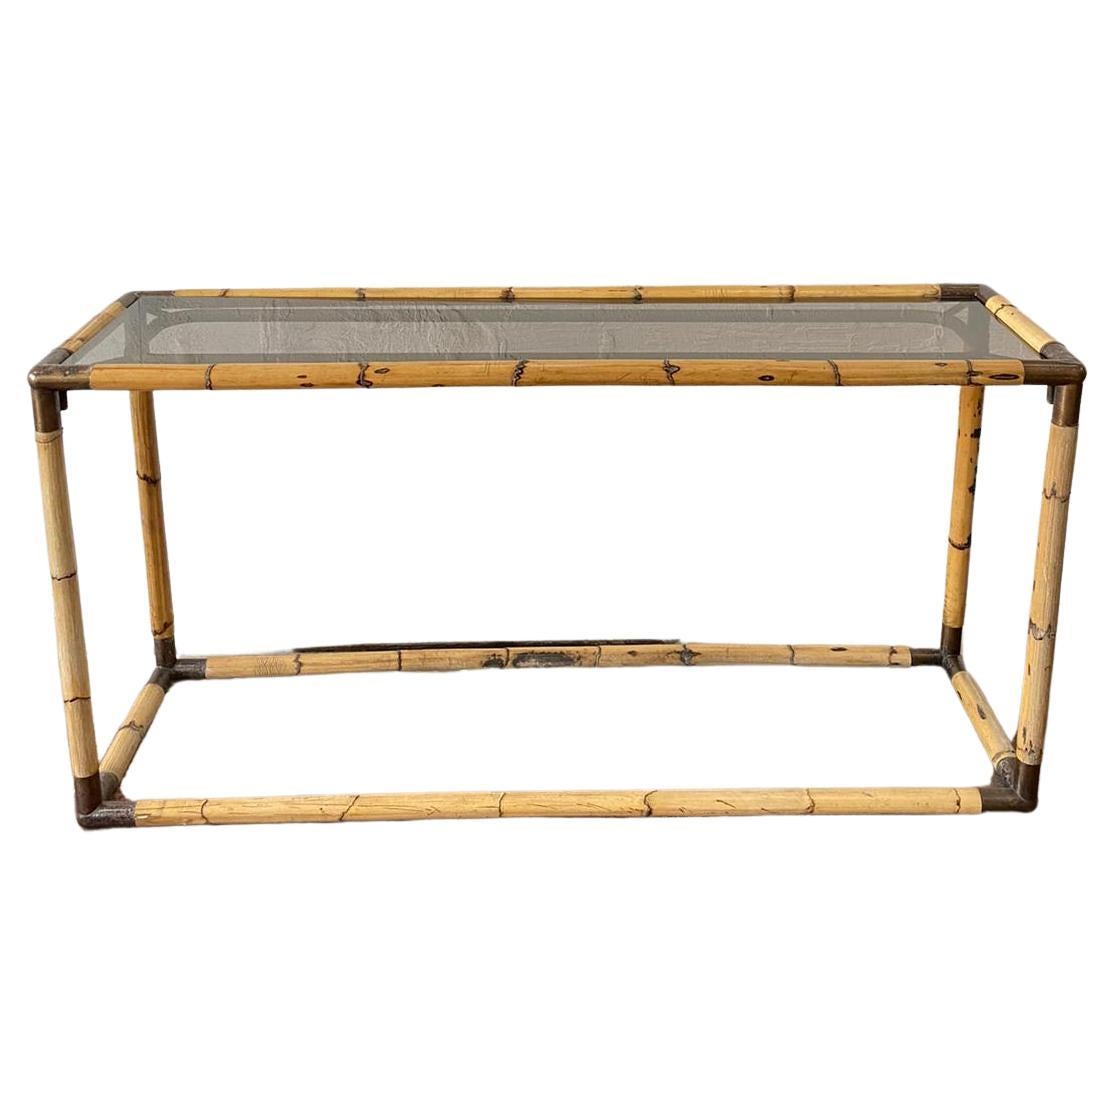 An Elegant Italian Mid-Century Modern Bamboo Console / Sofa Table by Banci For Sale